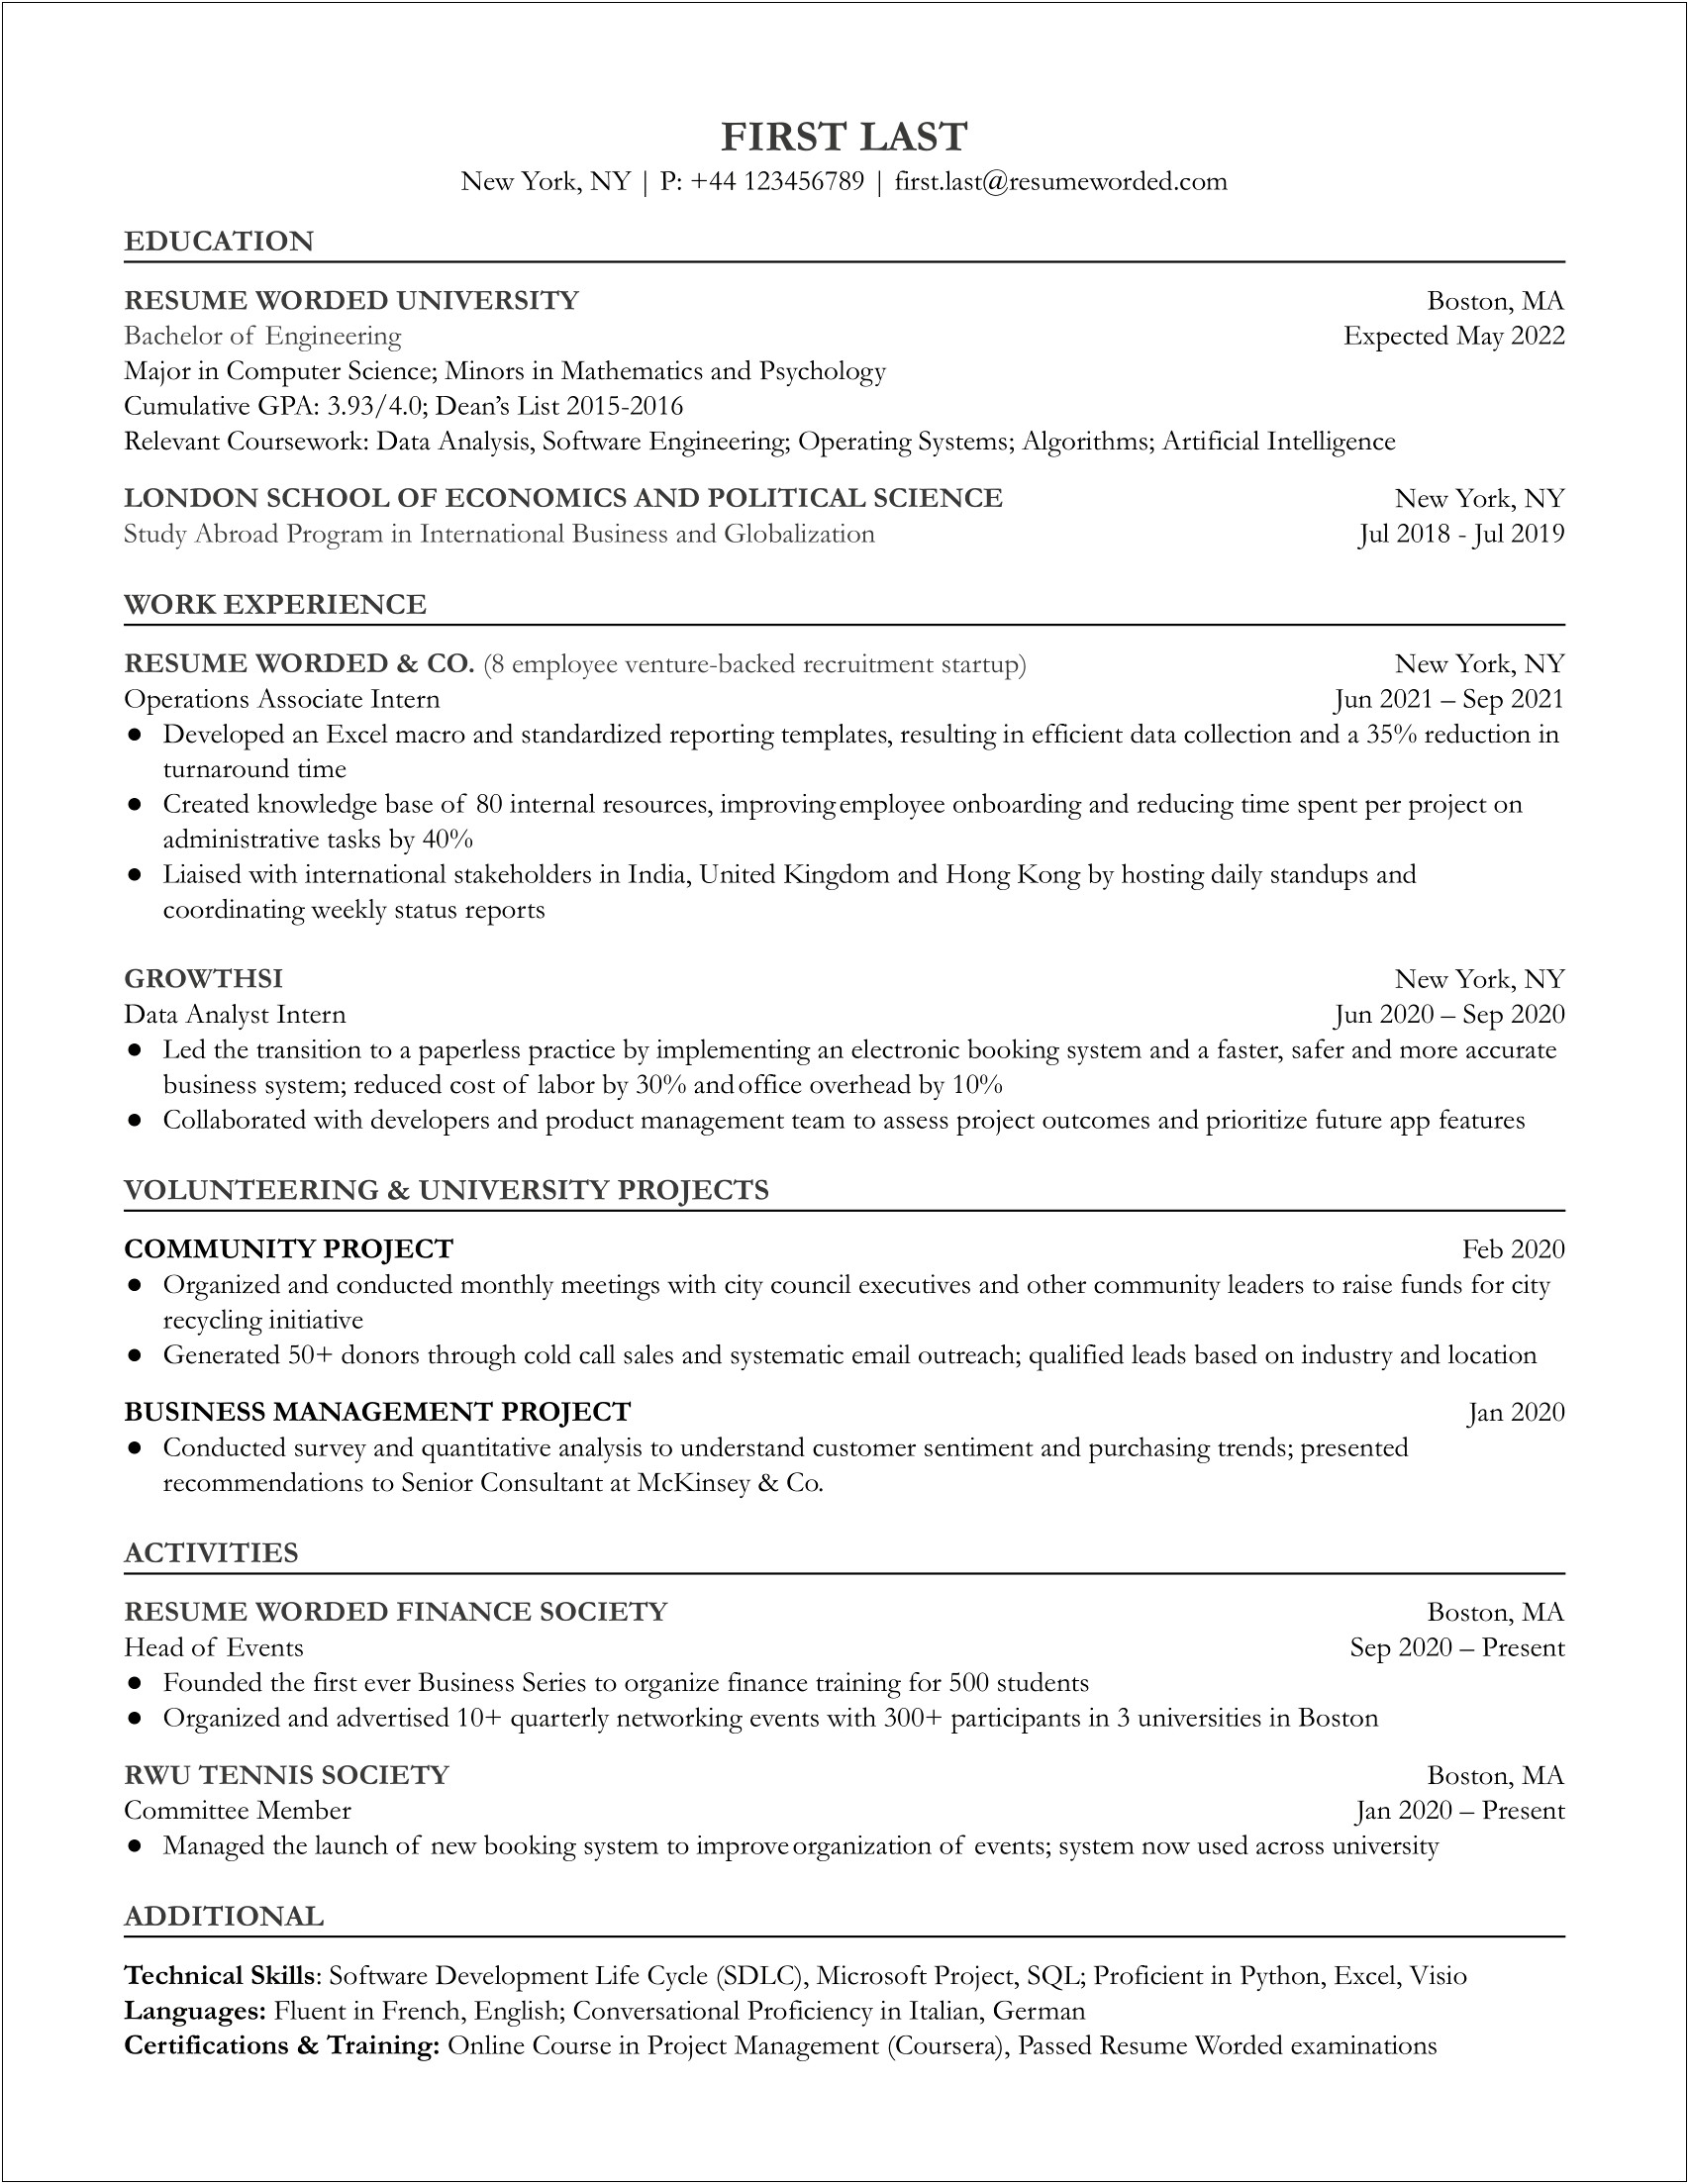 Resume Entry Fir Manager Position